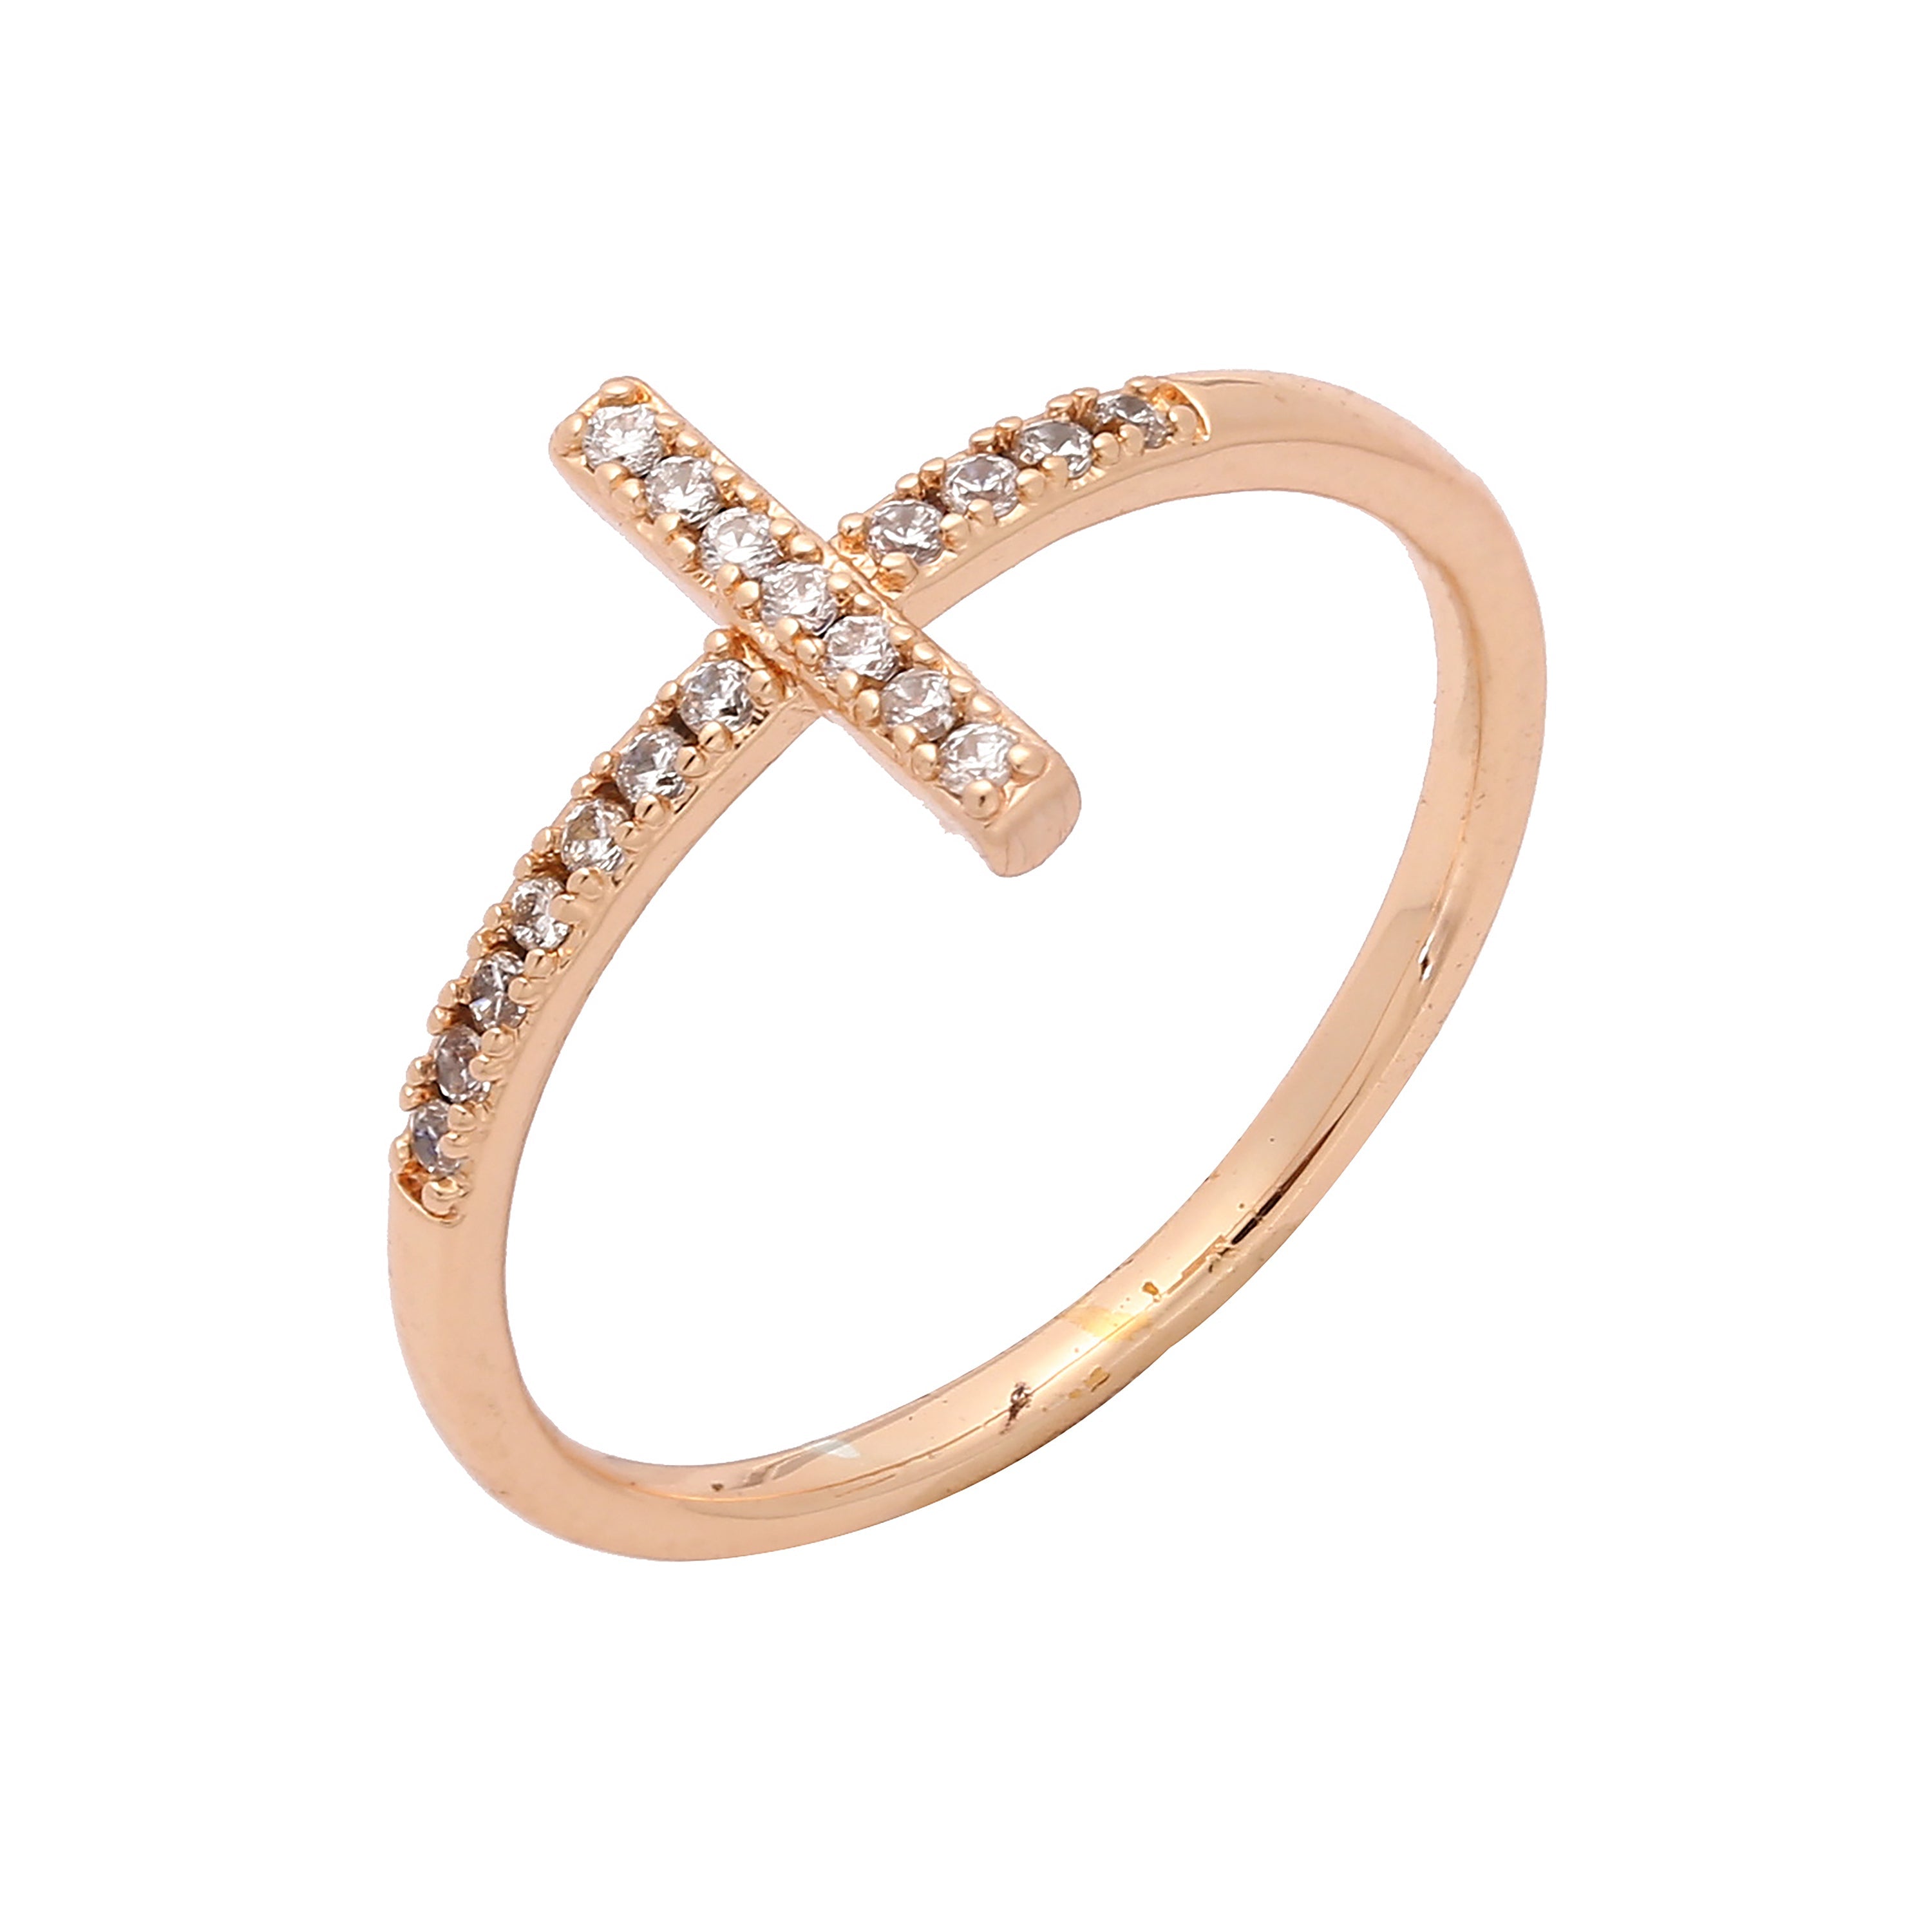 Solitaire tension rings of explicit simplicity in White Gold, 14K Gold, Rose Gold plating colors